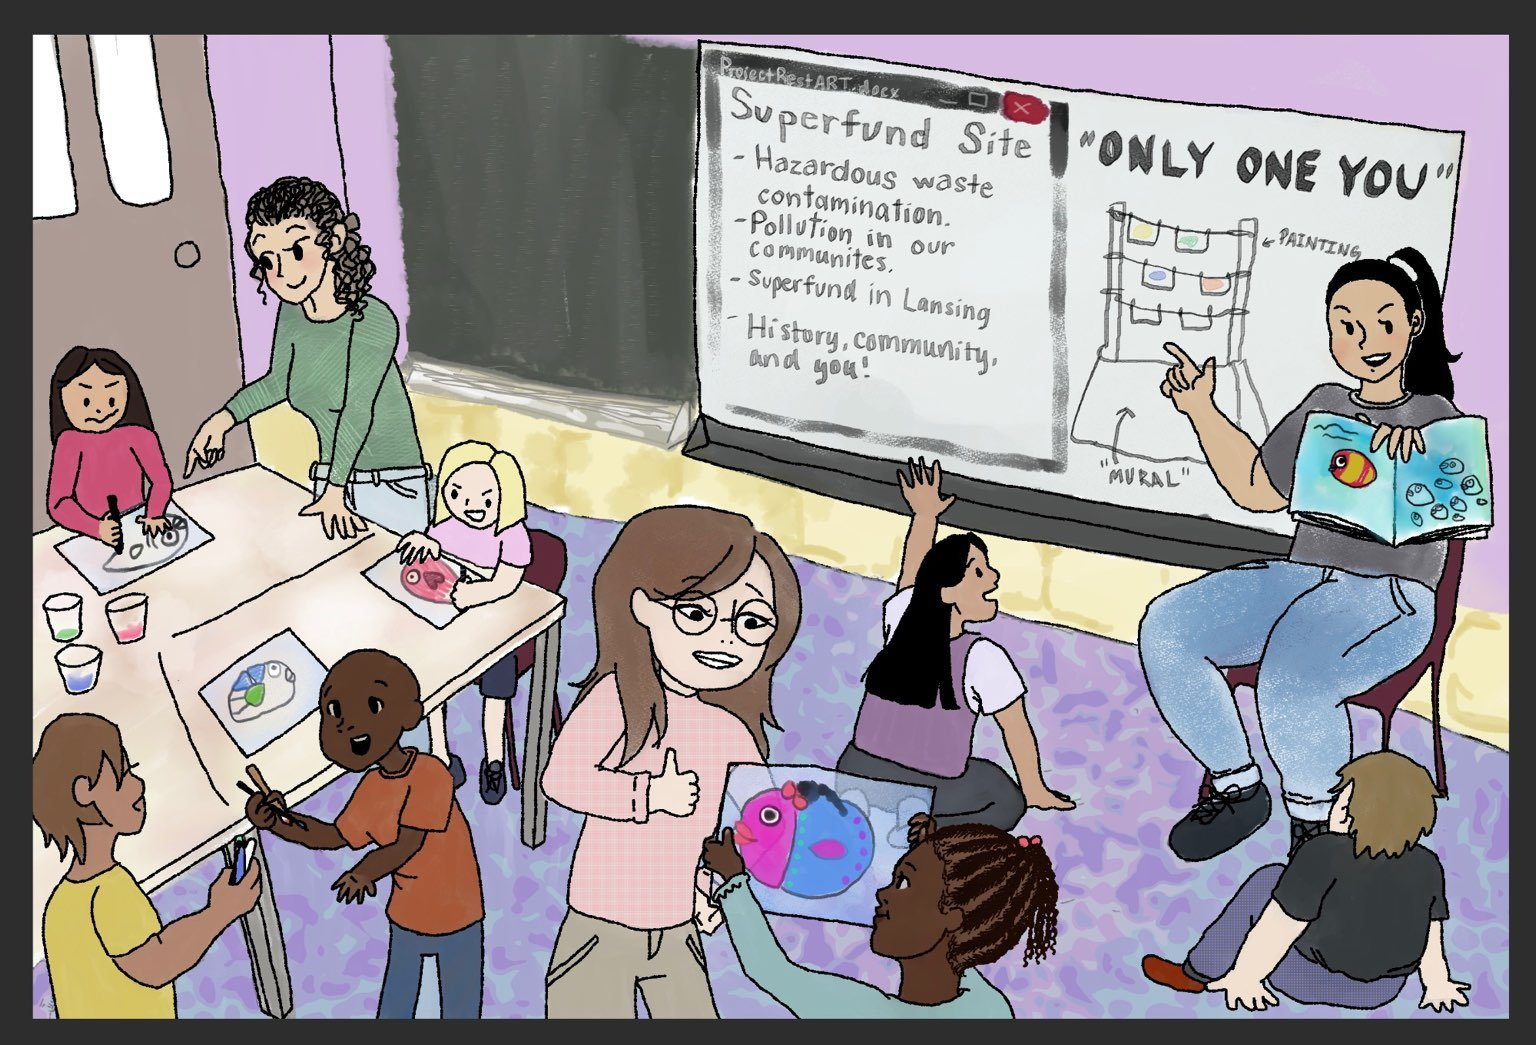 Image is a drawing of a classroom setting, showing young women teaching at the board and helping children make colorful art around the room.